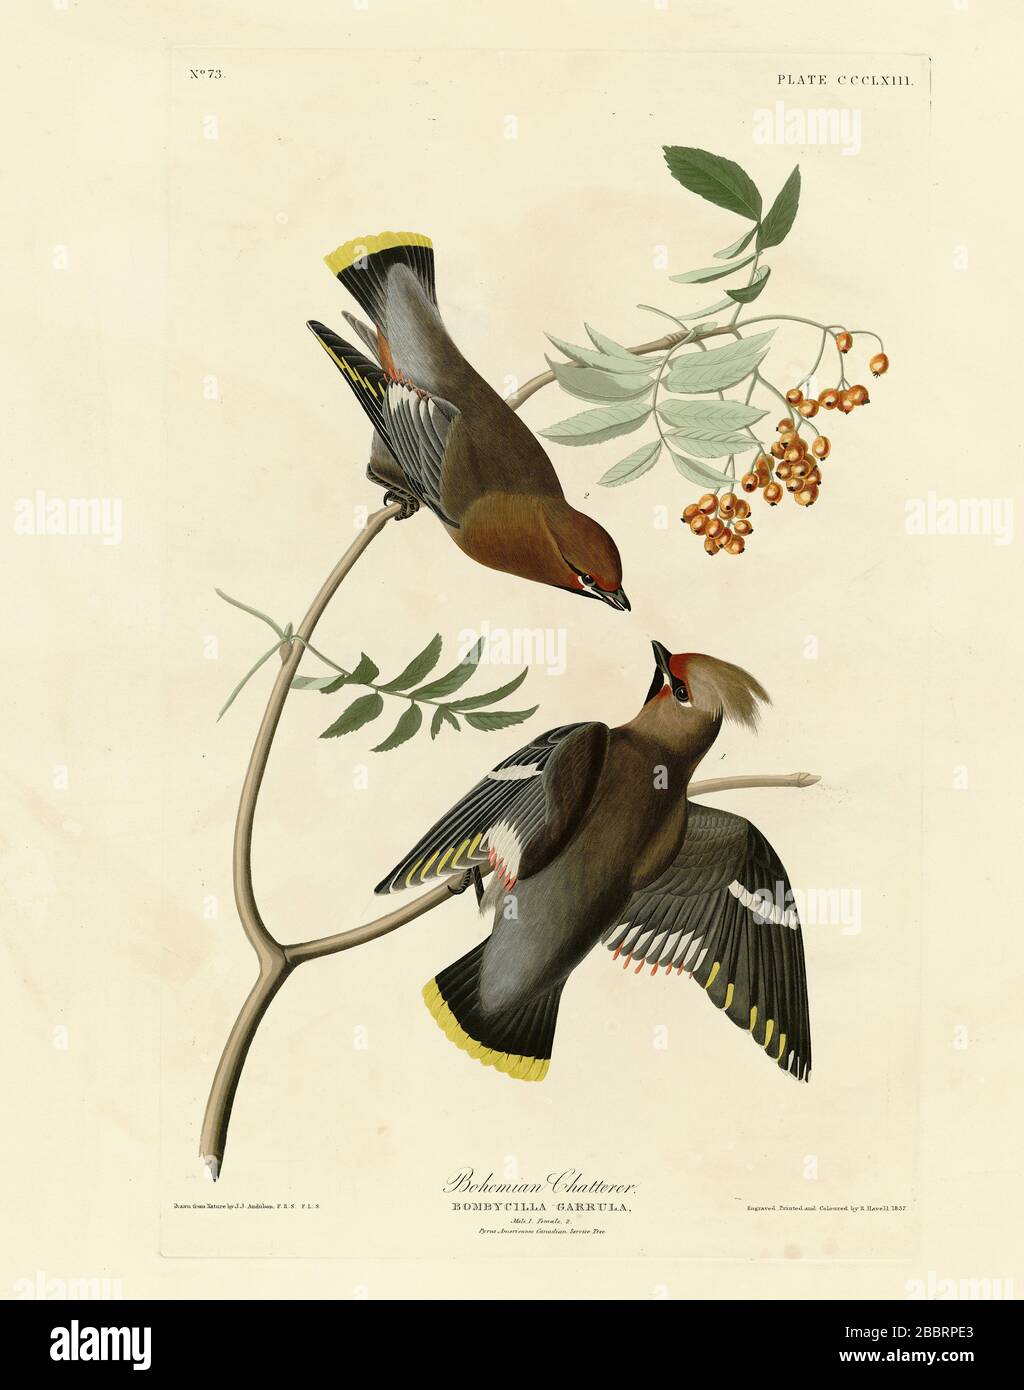 Plate 363 Bohemian Chatterer (Bohemian Waxwing) The Birds of America folio (1827–1839) by John James Audubon, Very high resolution and quality image Stock Photo